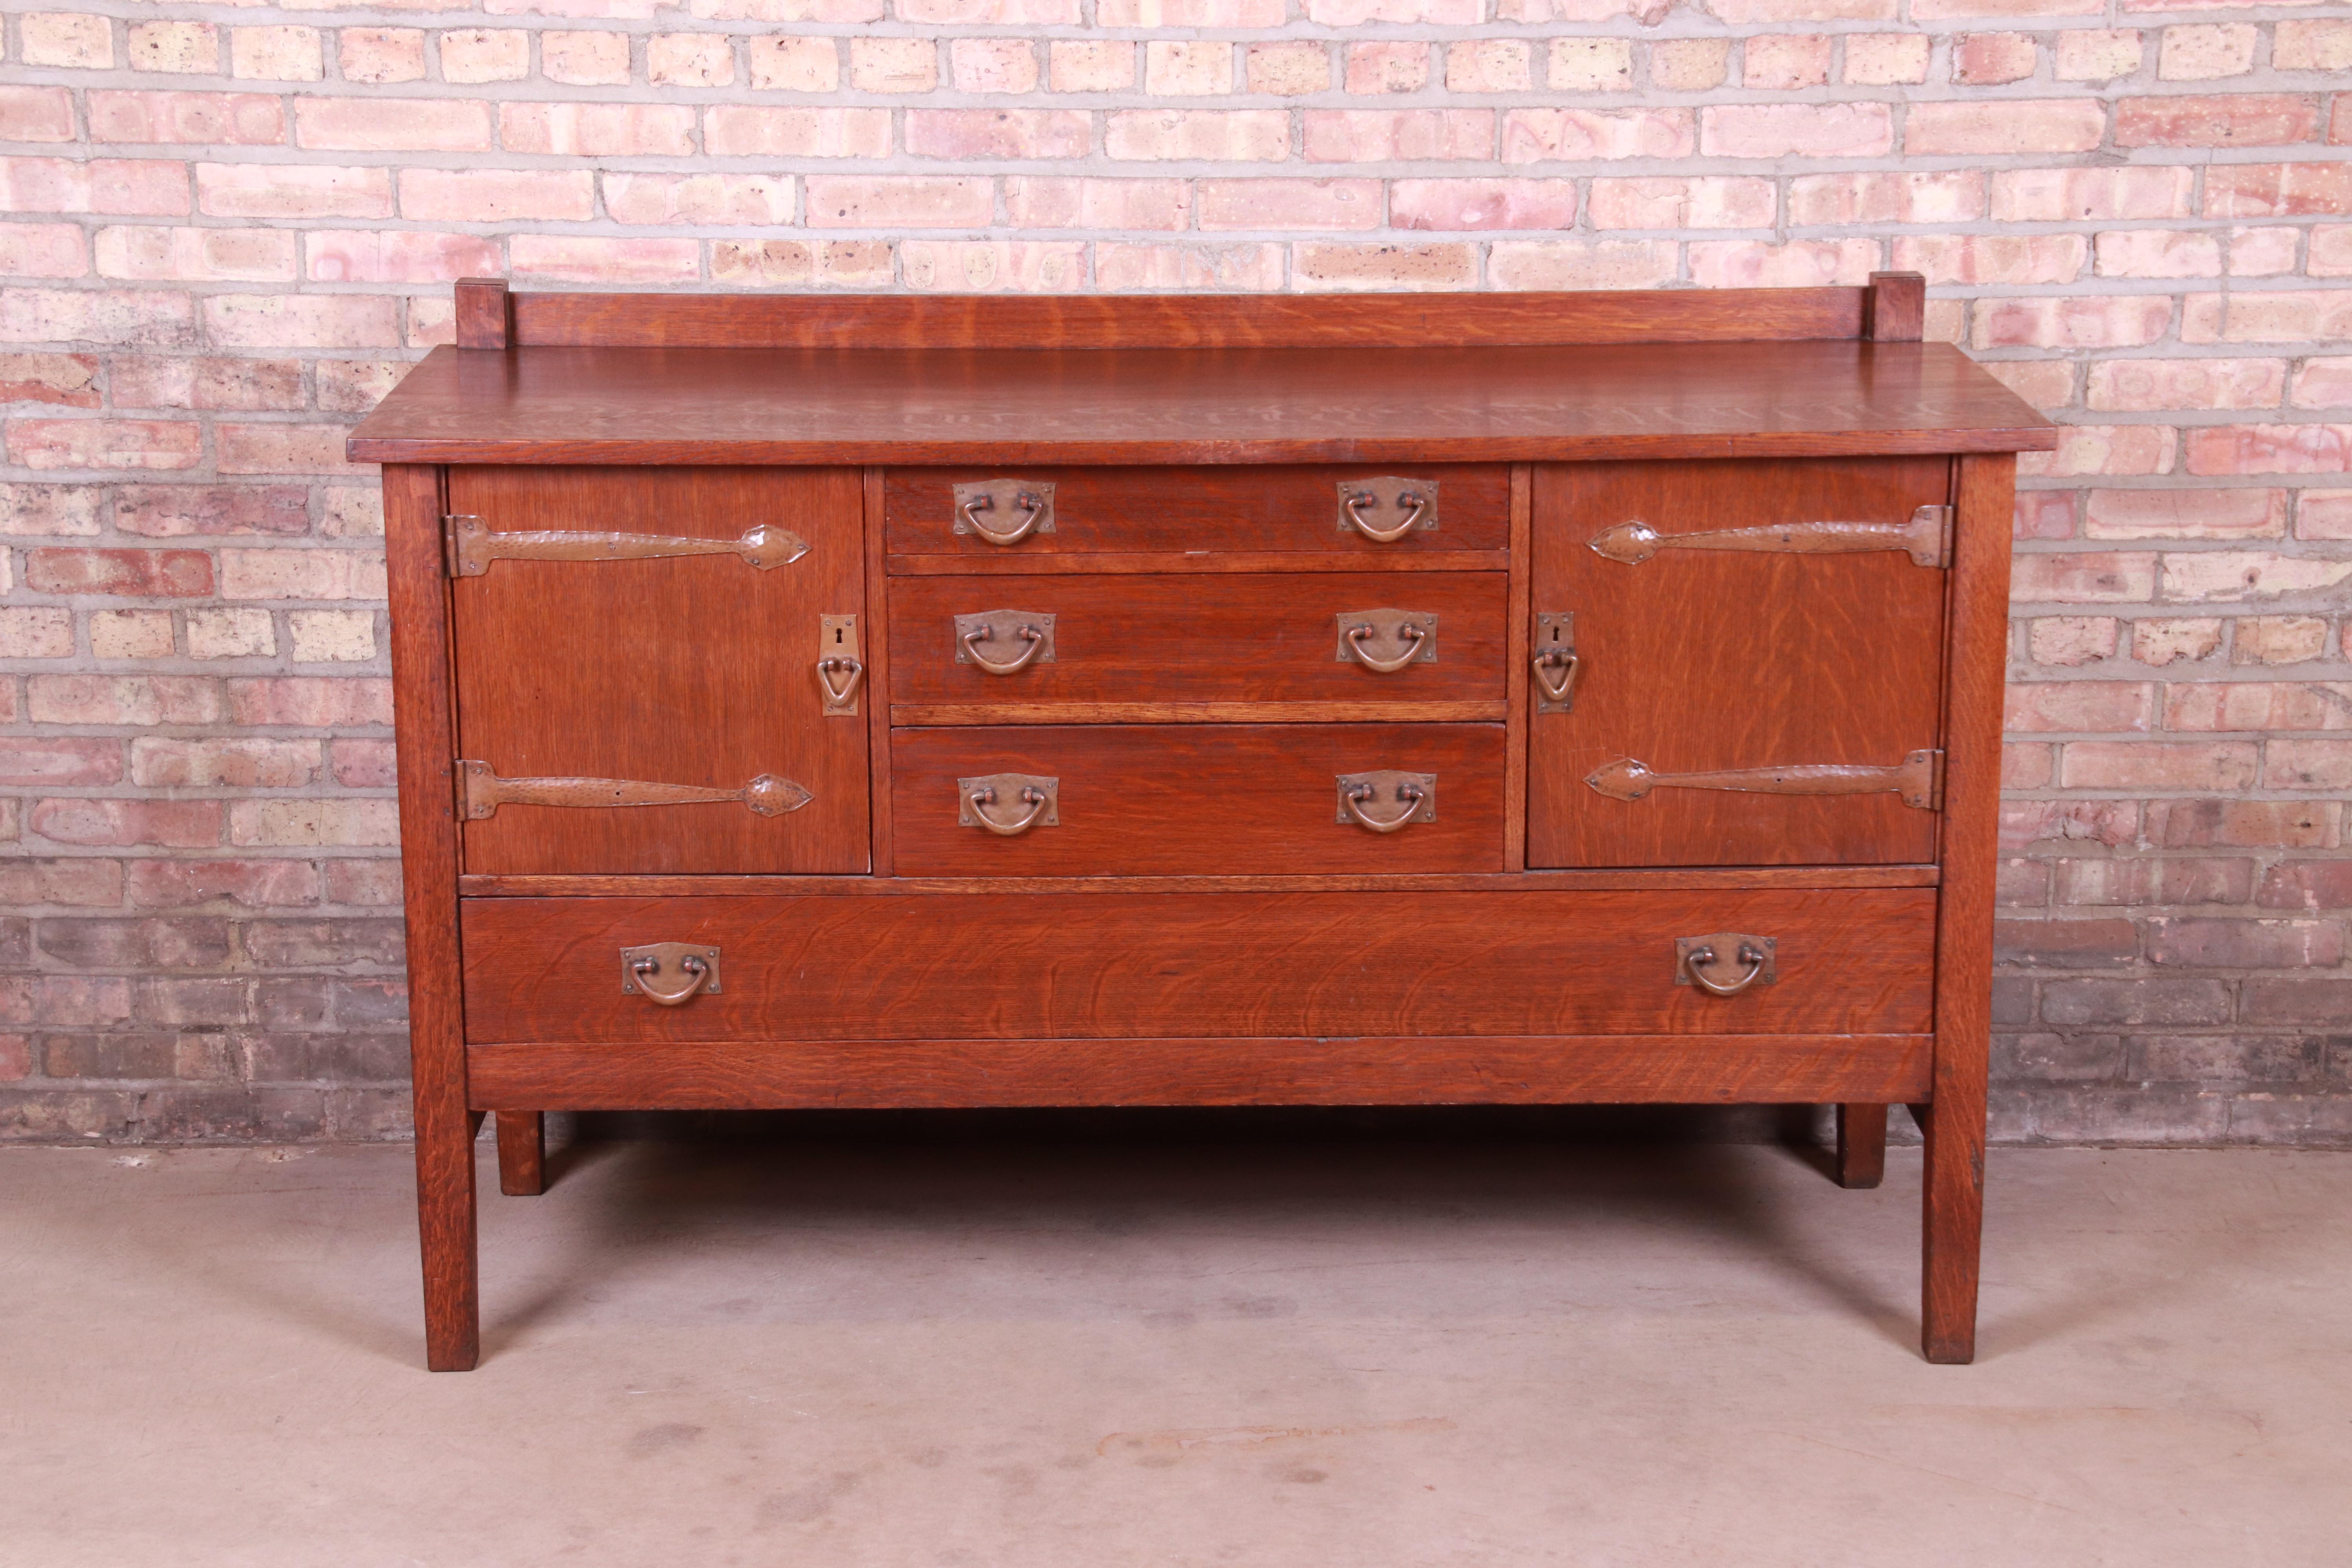 A rare and exceptional antique Mission oak Arts & Crafts sideboard or credenza

By Gustav Stickley

USA, Circa 1900

Quarter sawn oak, with original hammered copper hardware.

Measures: 62.25